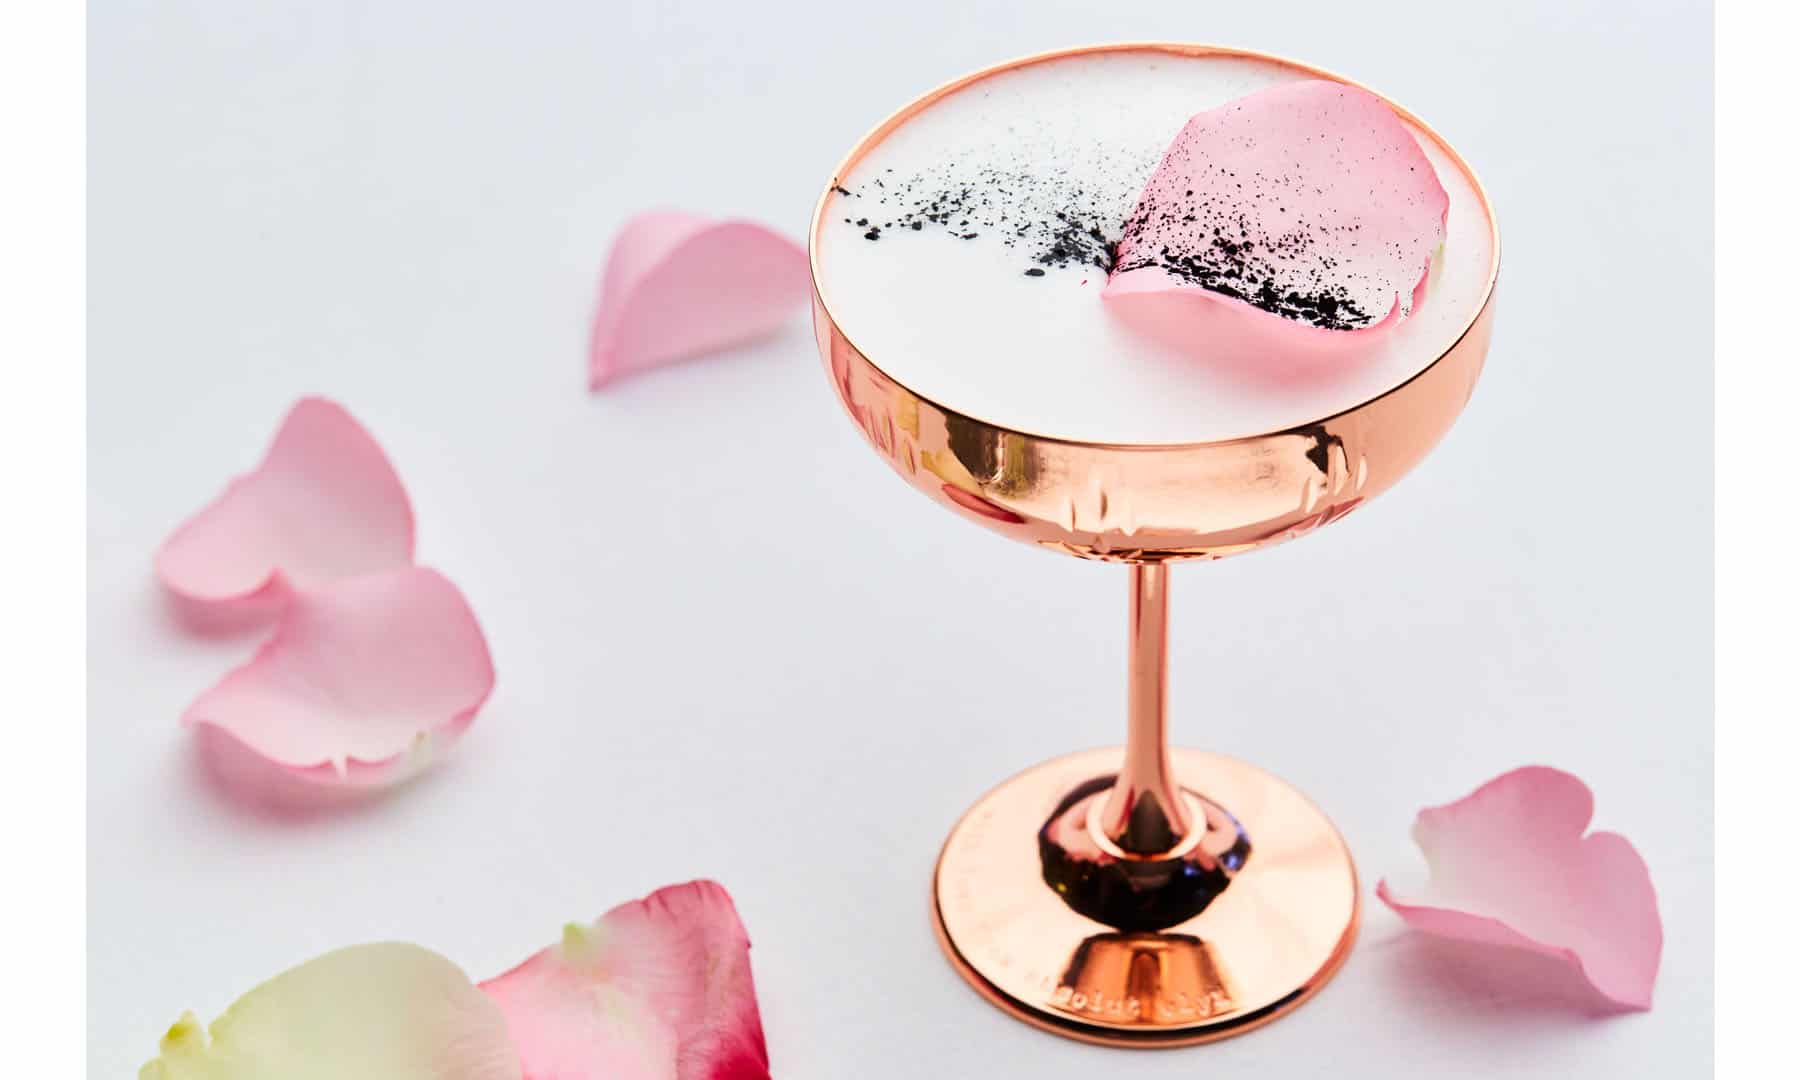 Rose cordial and charcoal dust cocktail